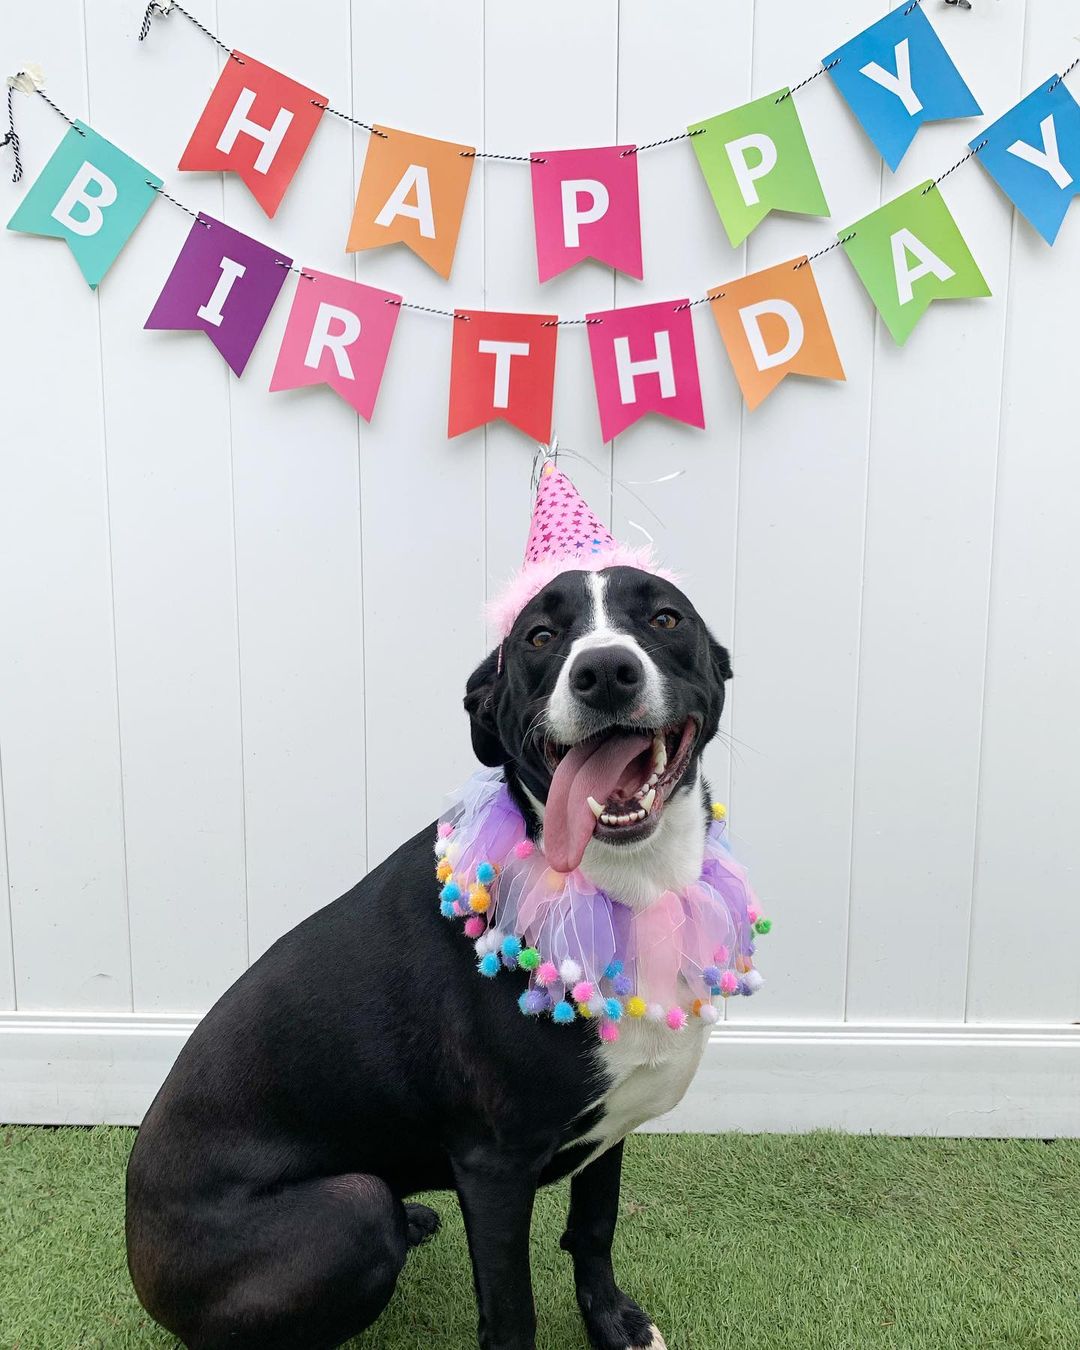 Happy Gotcha Day, Ripley! You are such a great big sister and friend. We love getting to hang out with you 🥰 thanks for spending your special day with us!